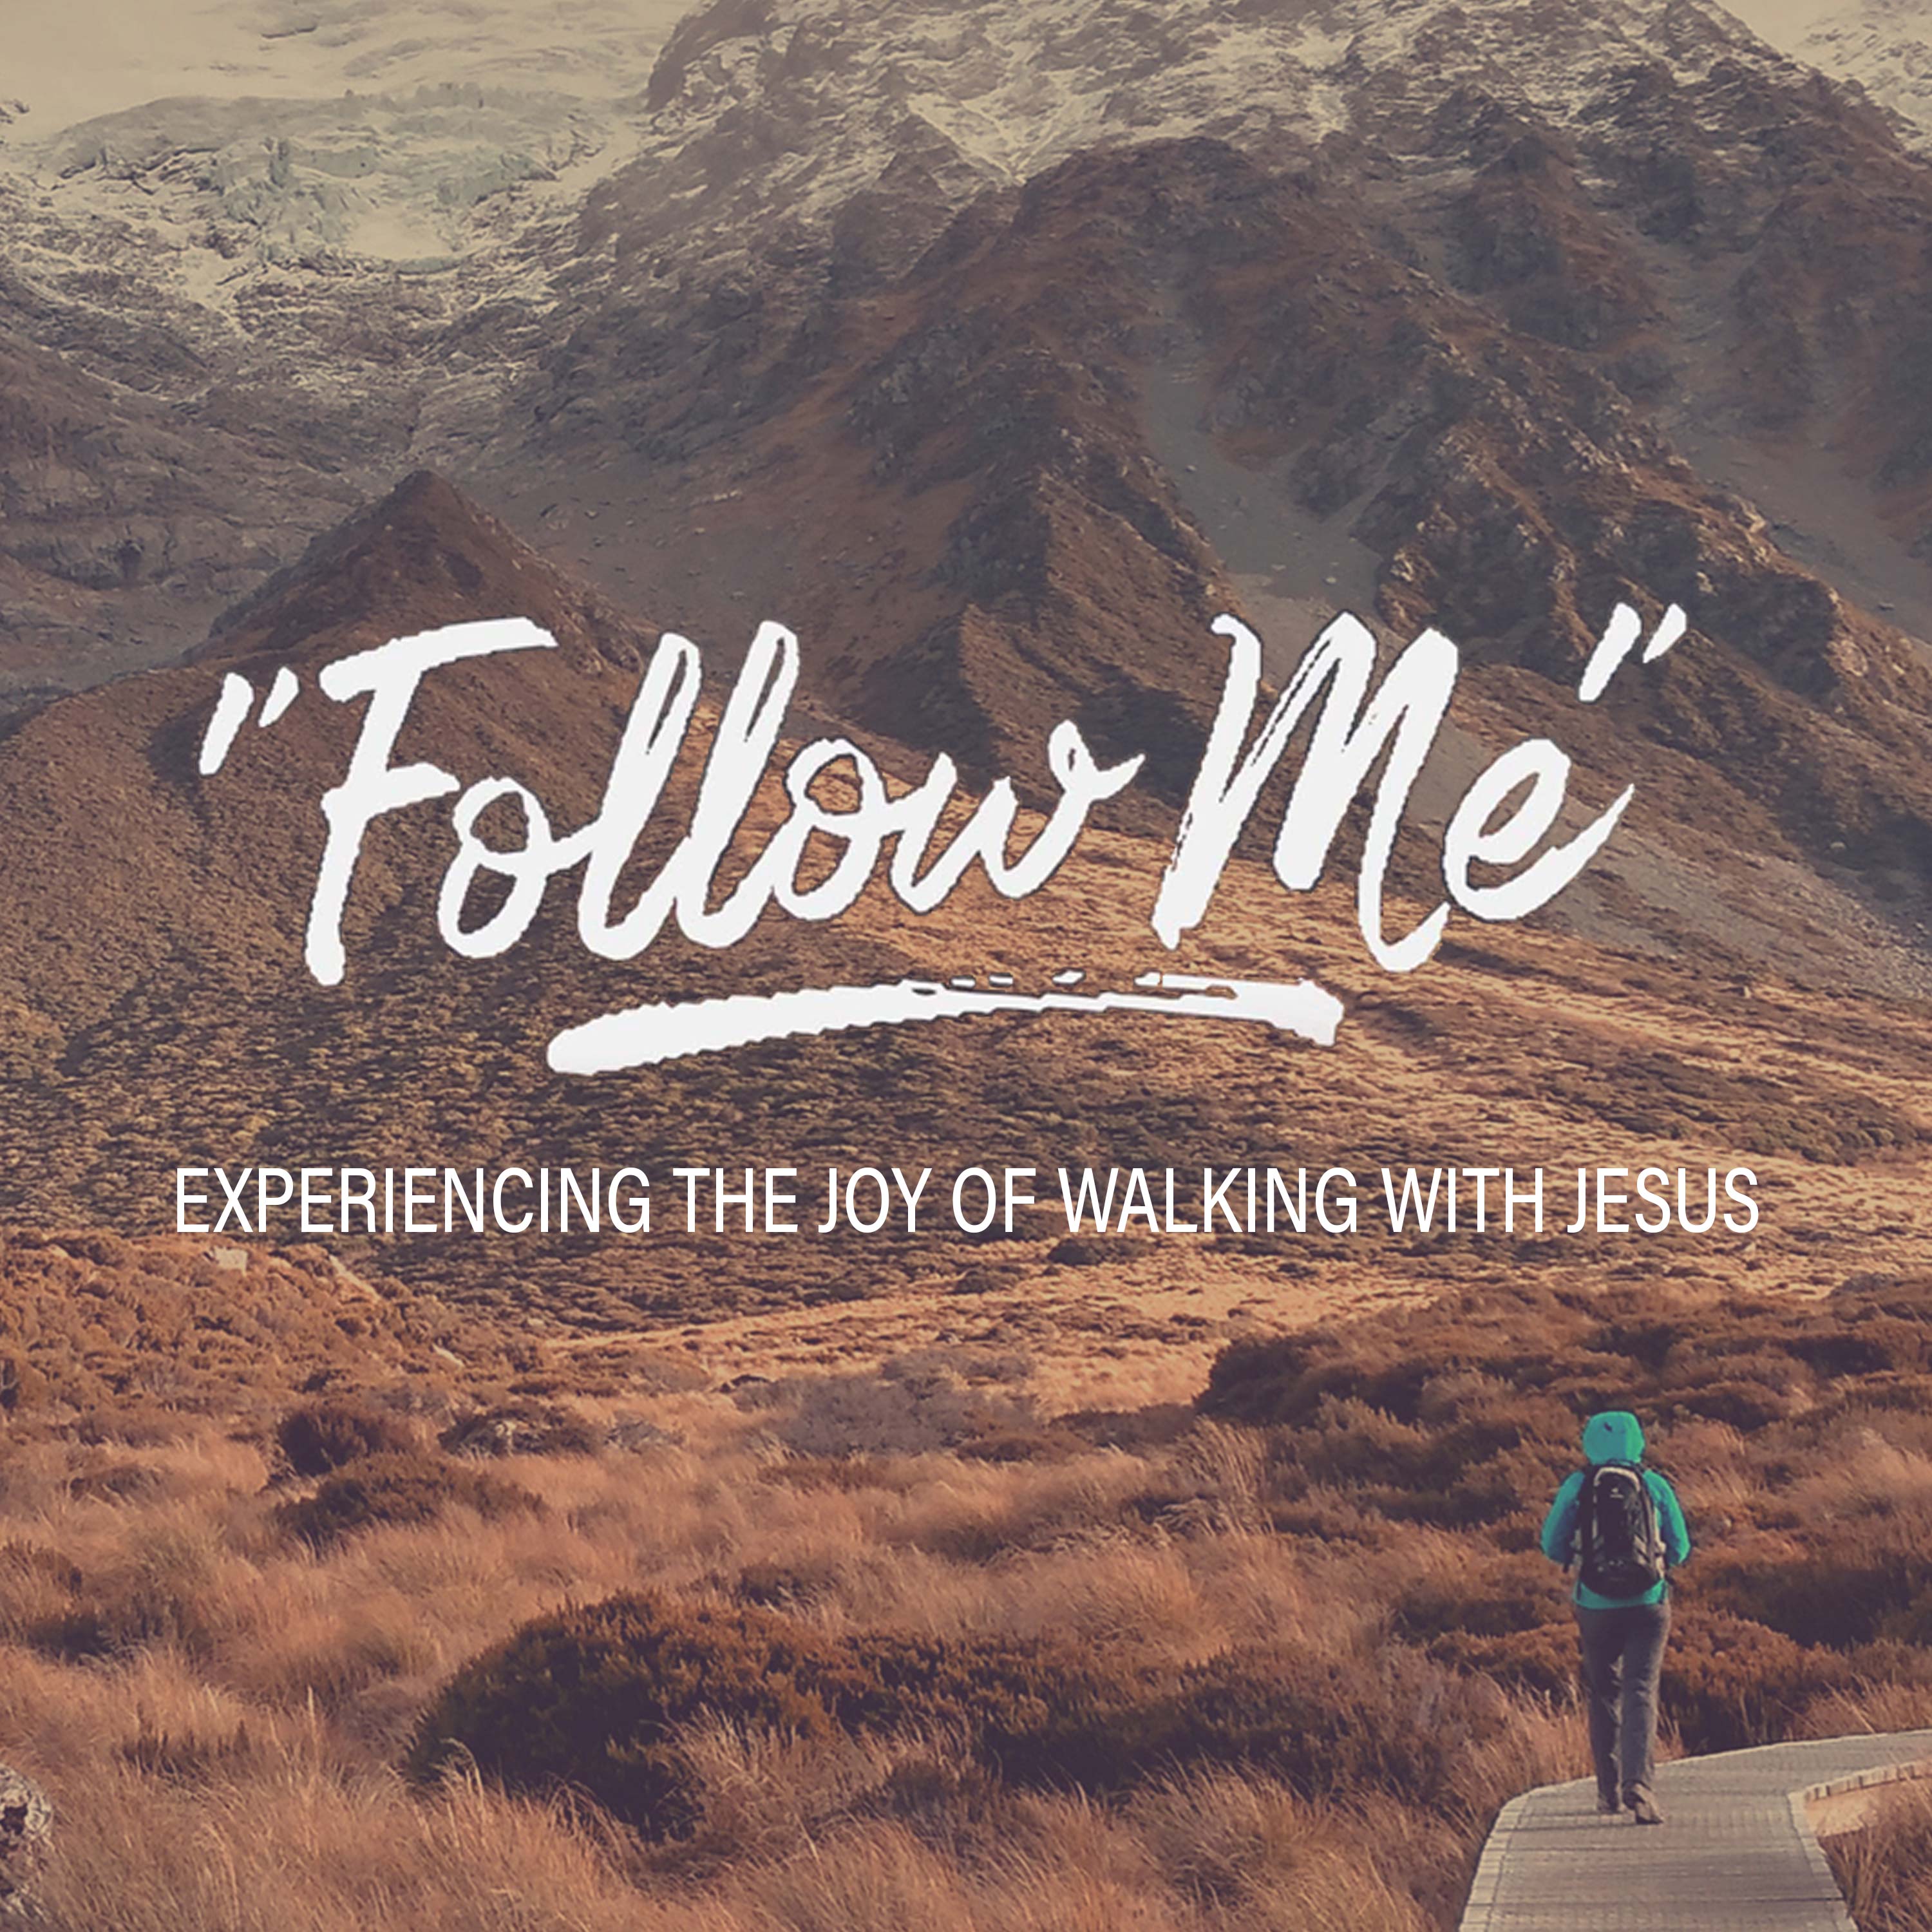 Follow Me - Experiencing the Joy of Walking with Jesus